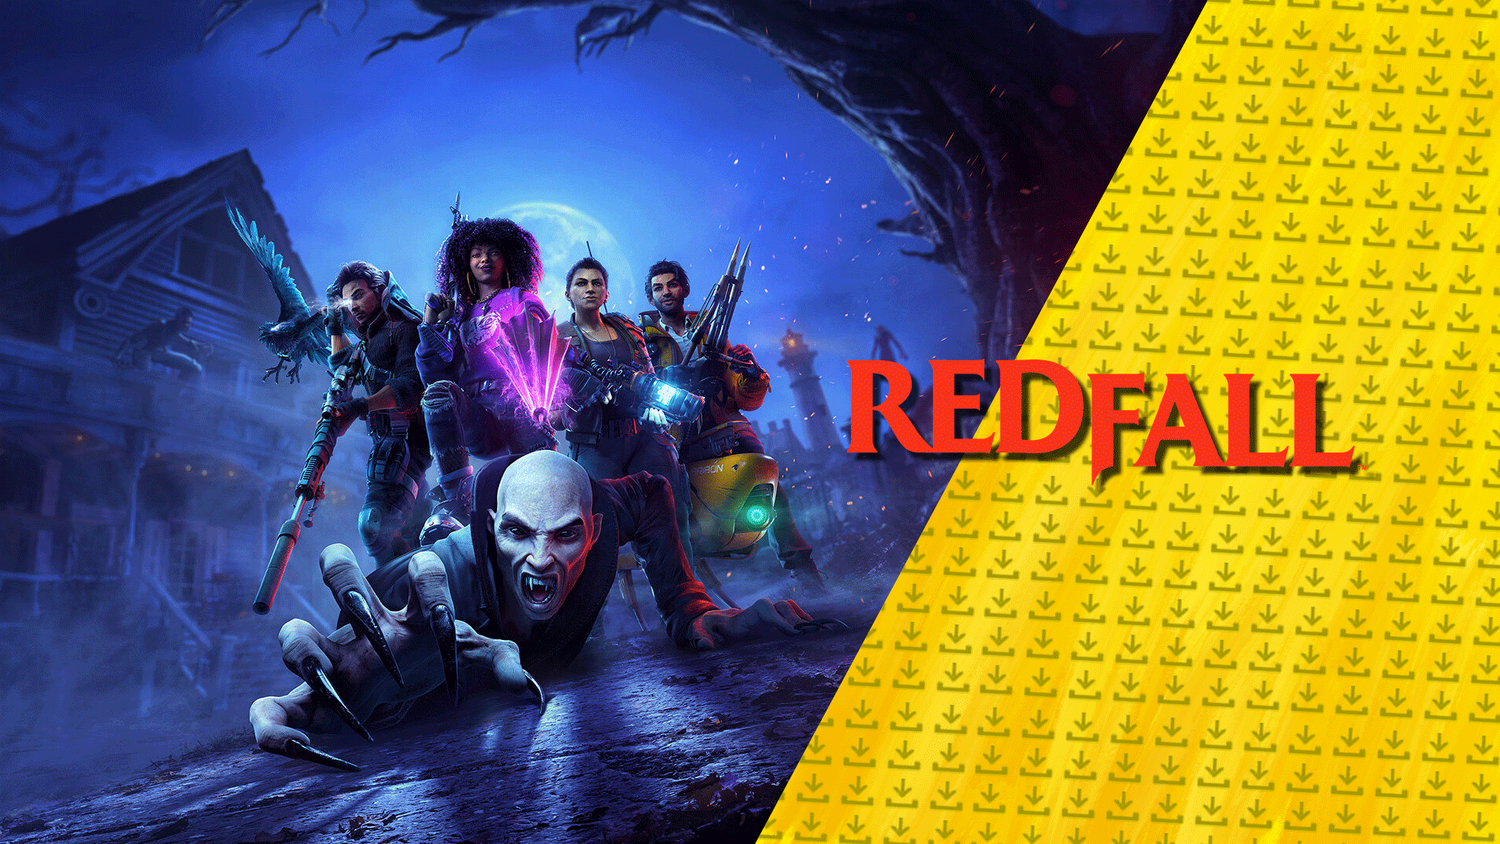 Redfall supports crossplay between Xbox and PC